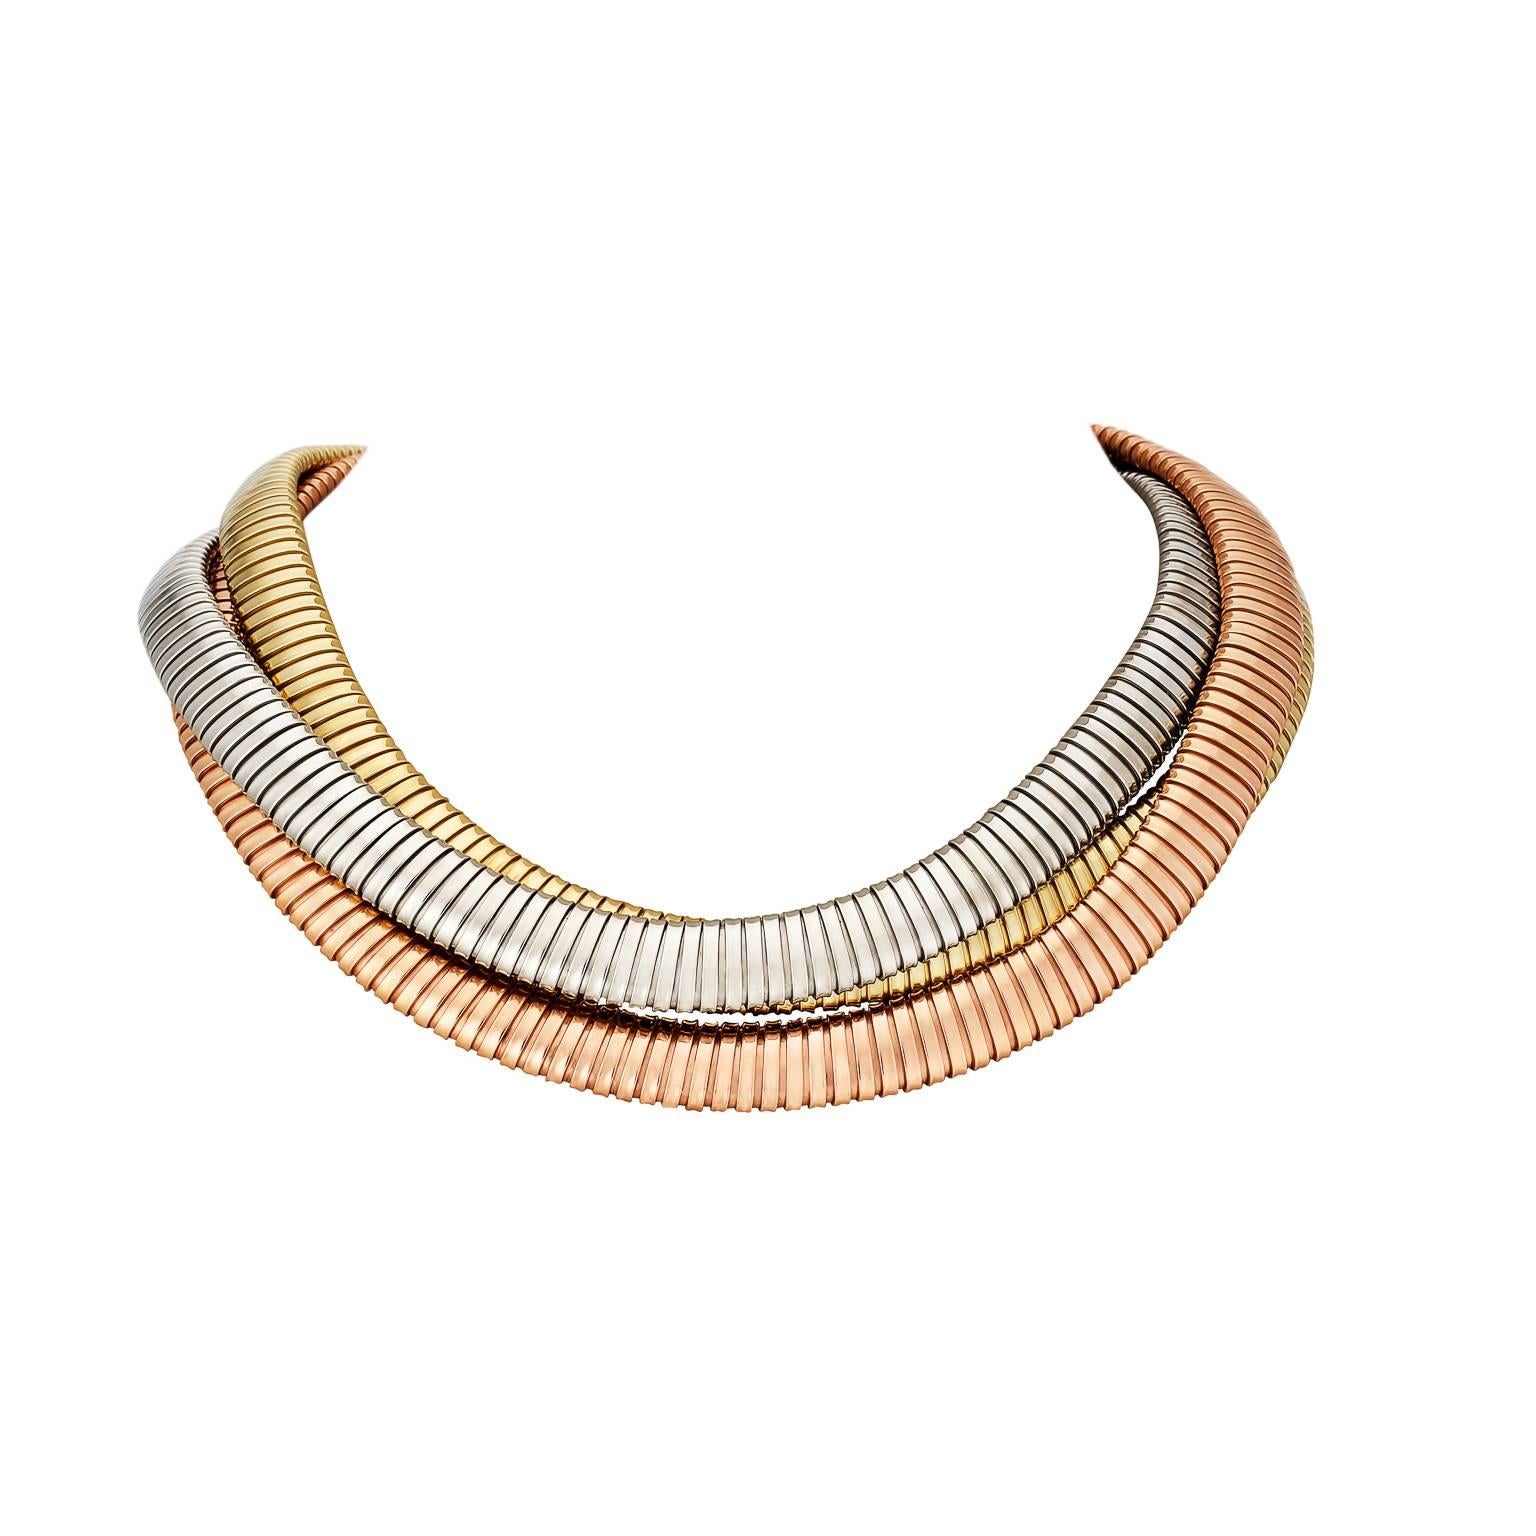 Inspired by the flexible metal piping from luxury sports car exhaust manifolds called tubogas in the 1920's, this handmade vintage rose, white and yellow gold necklace will wrap you in fashionable luxury.  Designed by Carlo Weingrill.  Made in